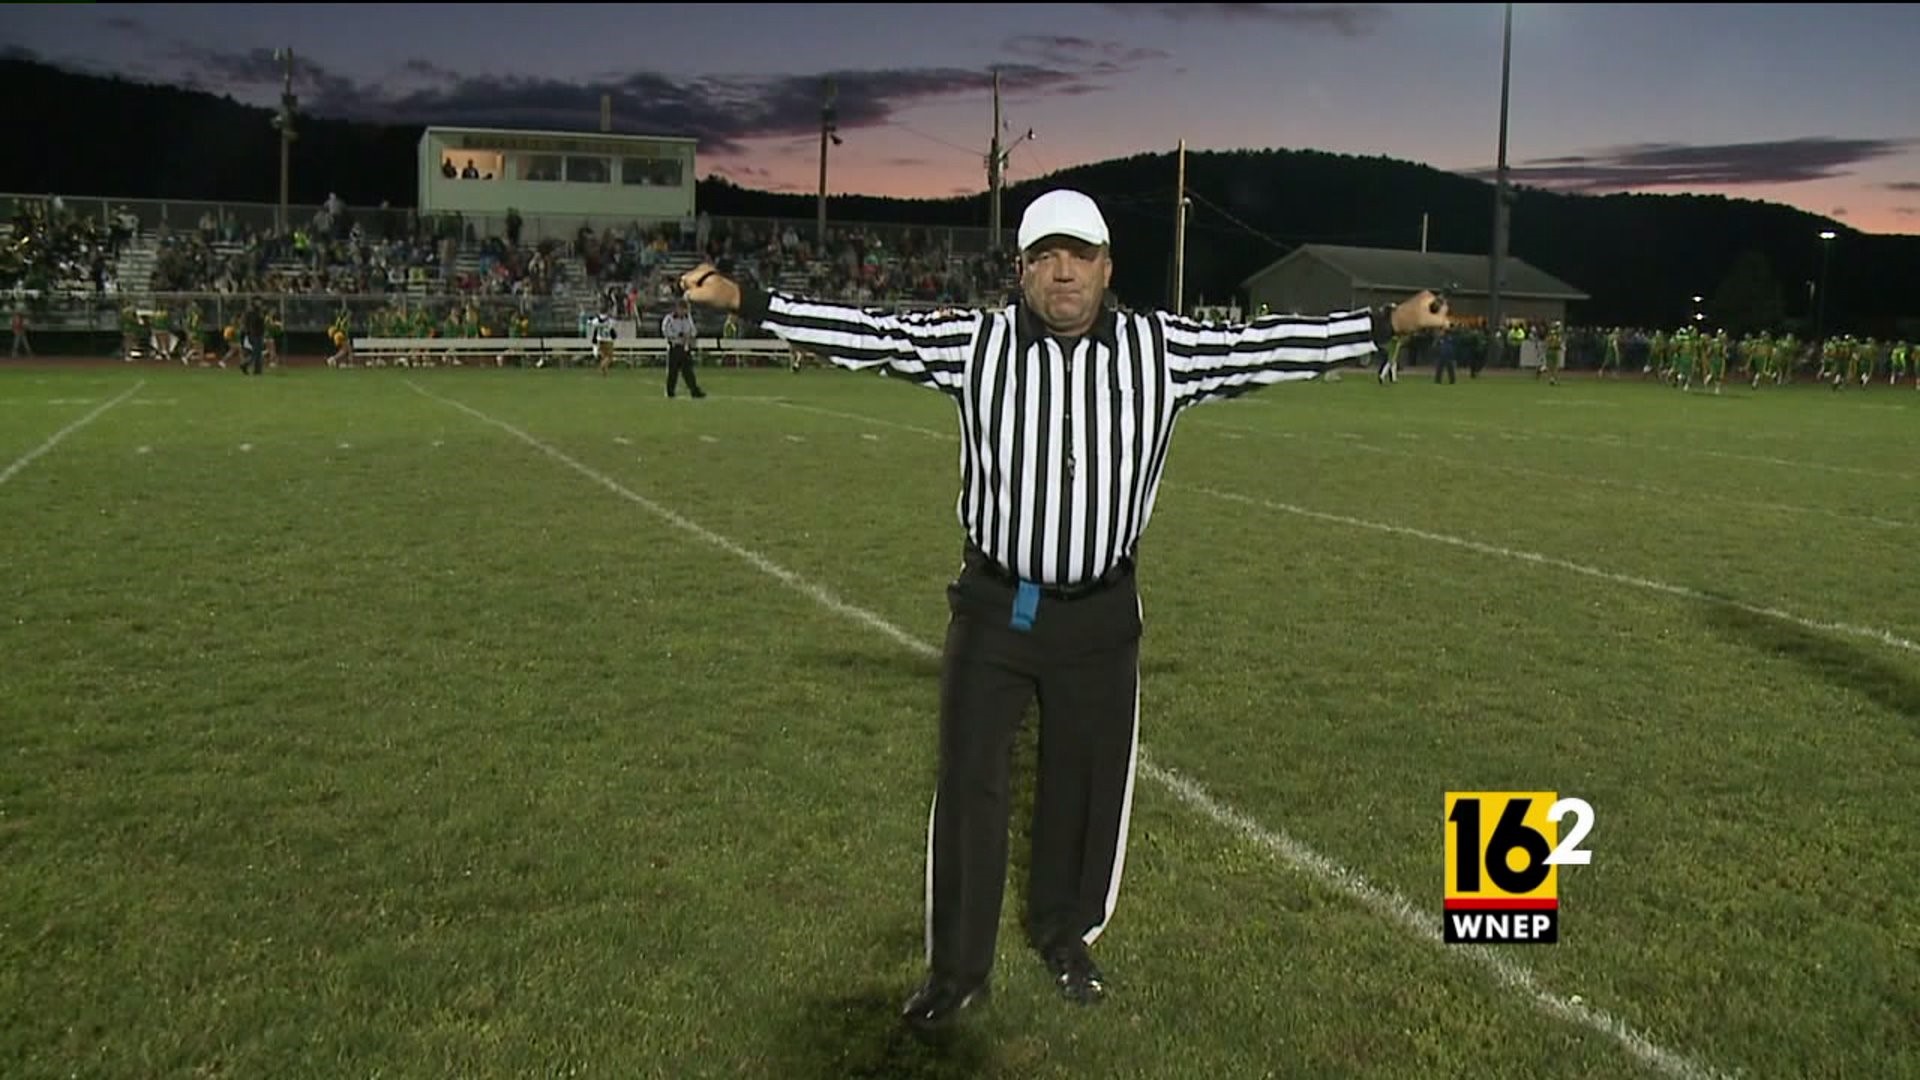 On the Gridiron with a PIAA Official